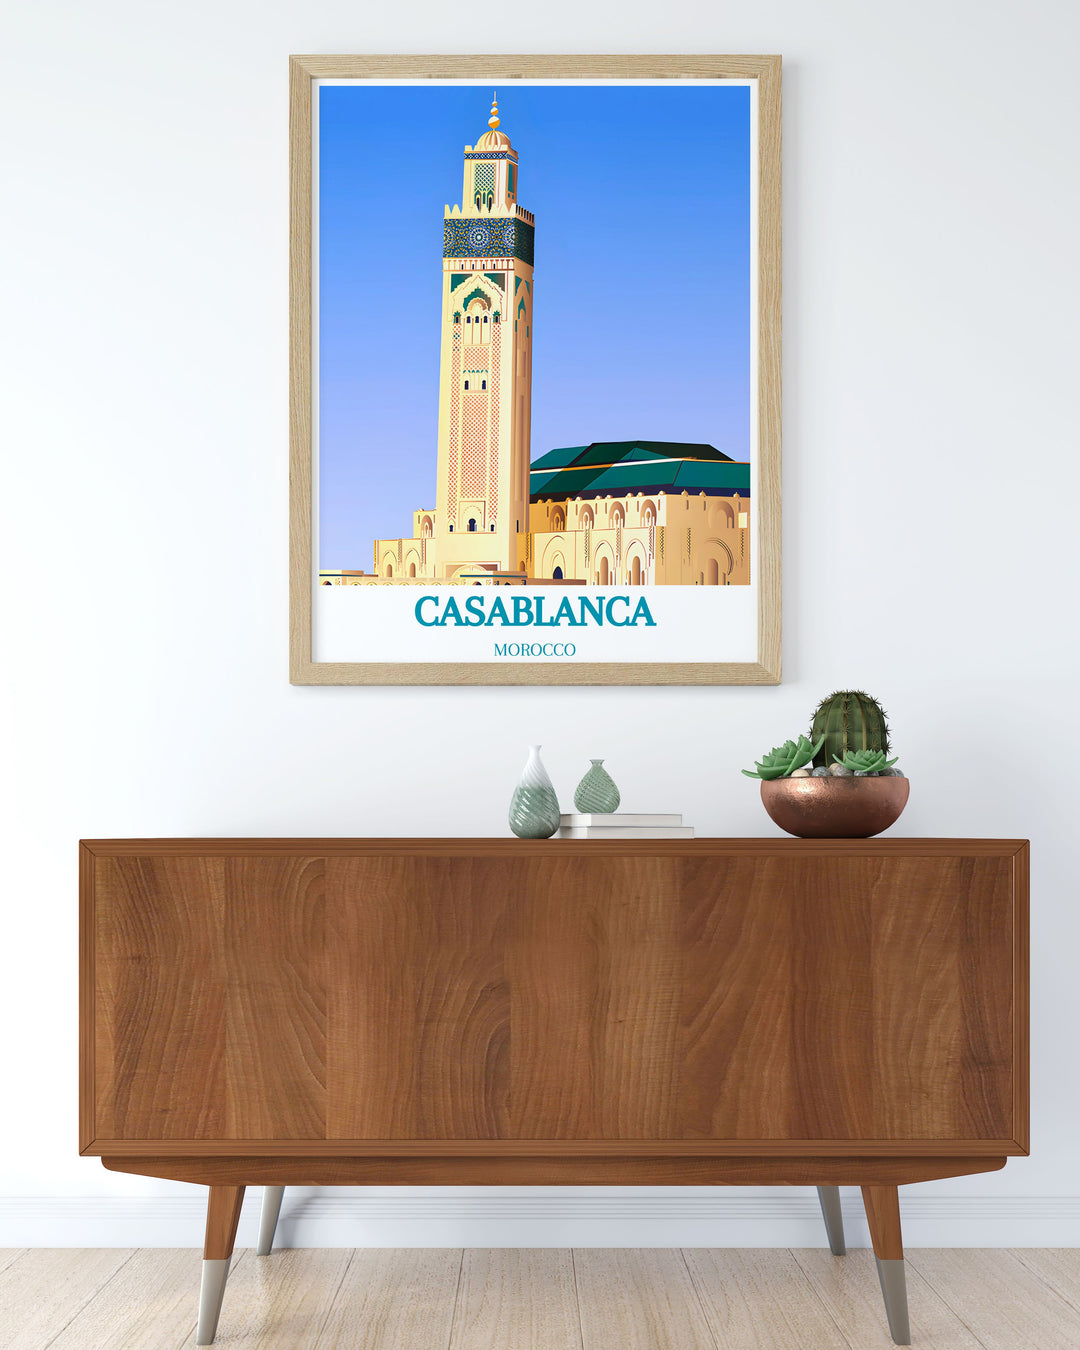 This poster artfully depicts Hassan II Mosque and its role as a central landmark in Casablanca, offering a perfect blend of architectural marvels and urban landscapes for your decor.